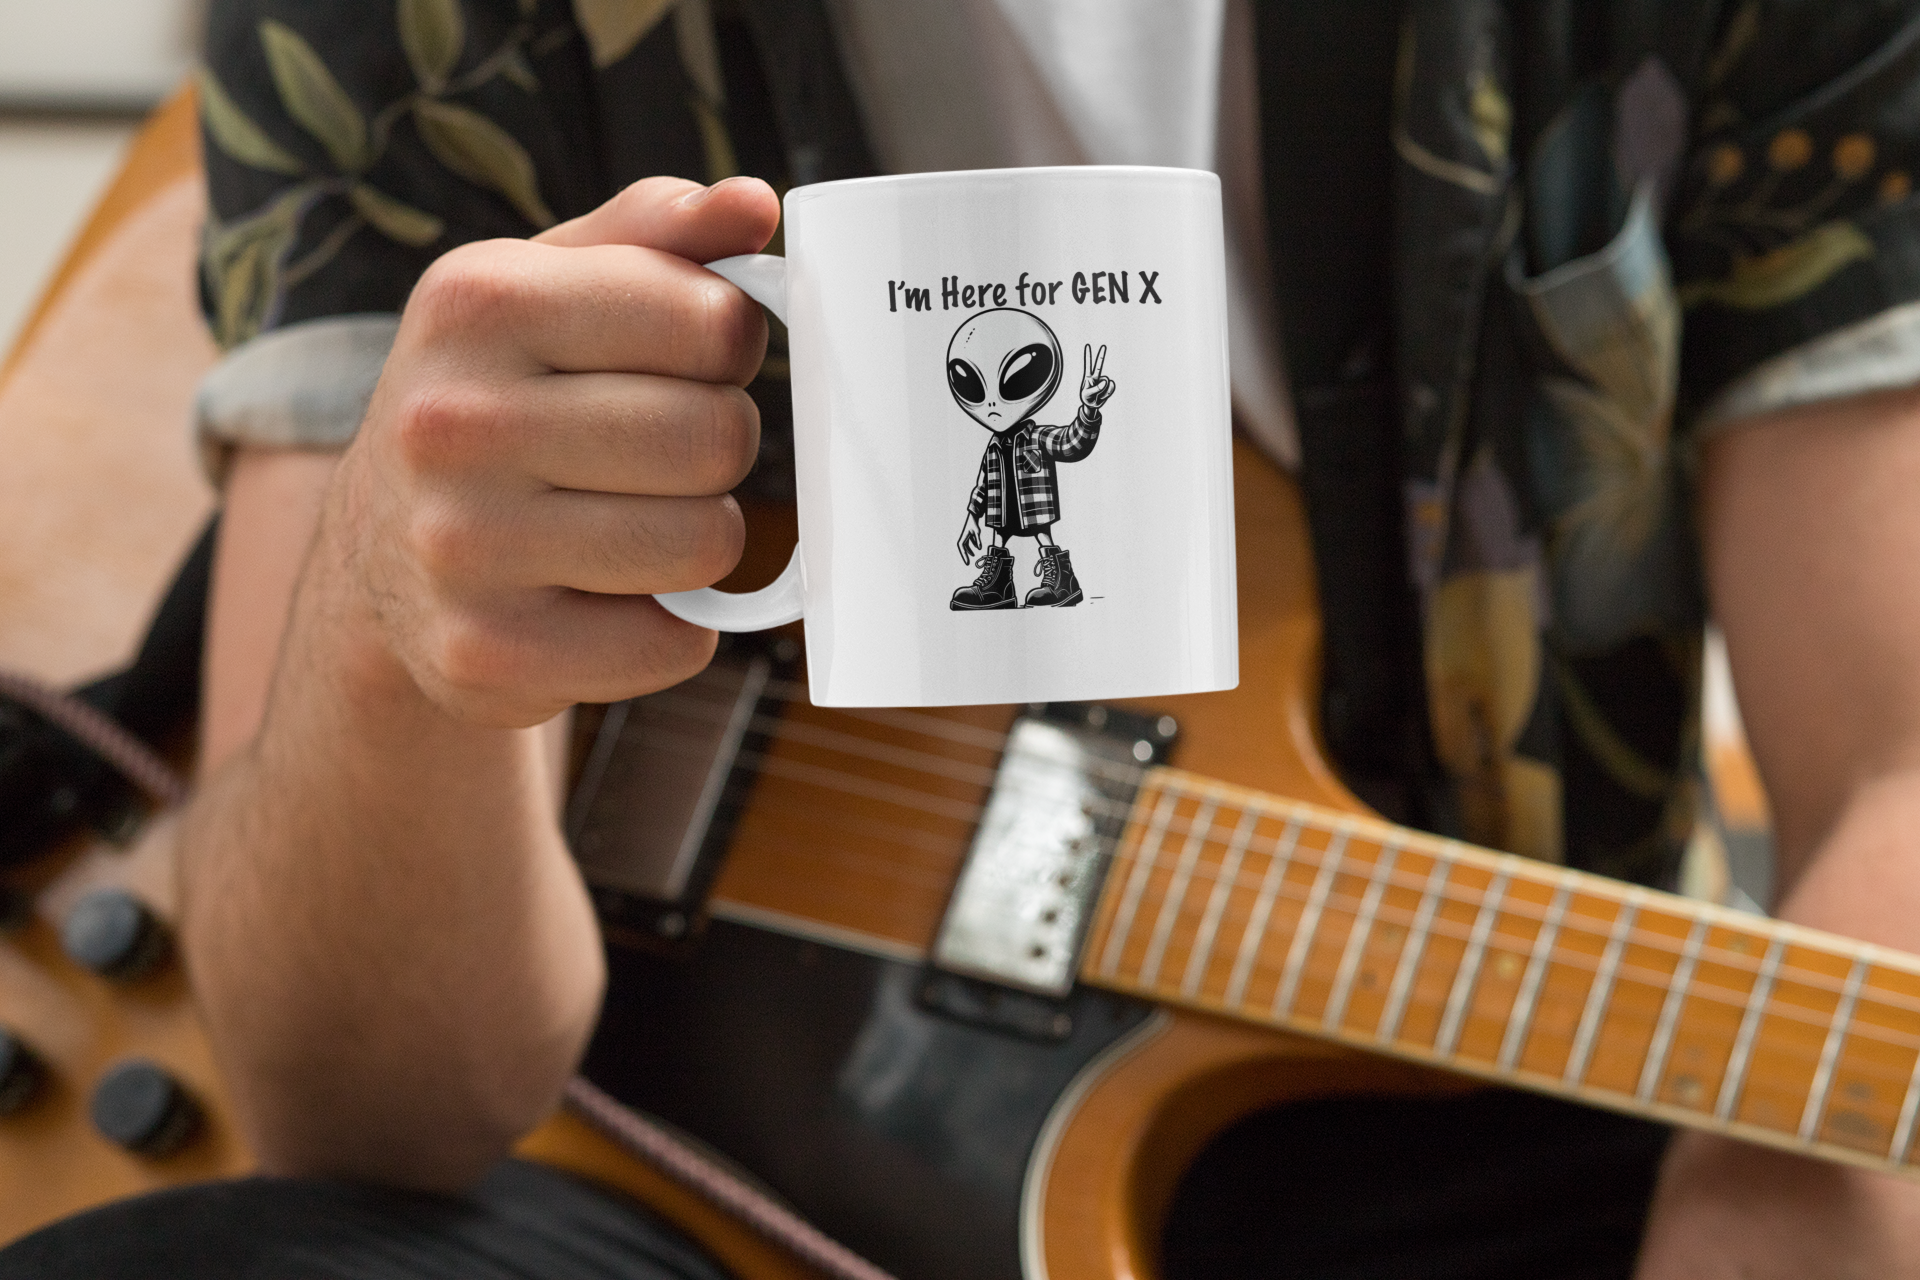  This mug that features an alien with combat boots and a flannel shirt, flashing a peace sign, saying “I’m here for Gen X”.